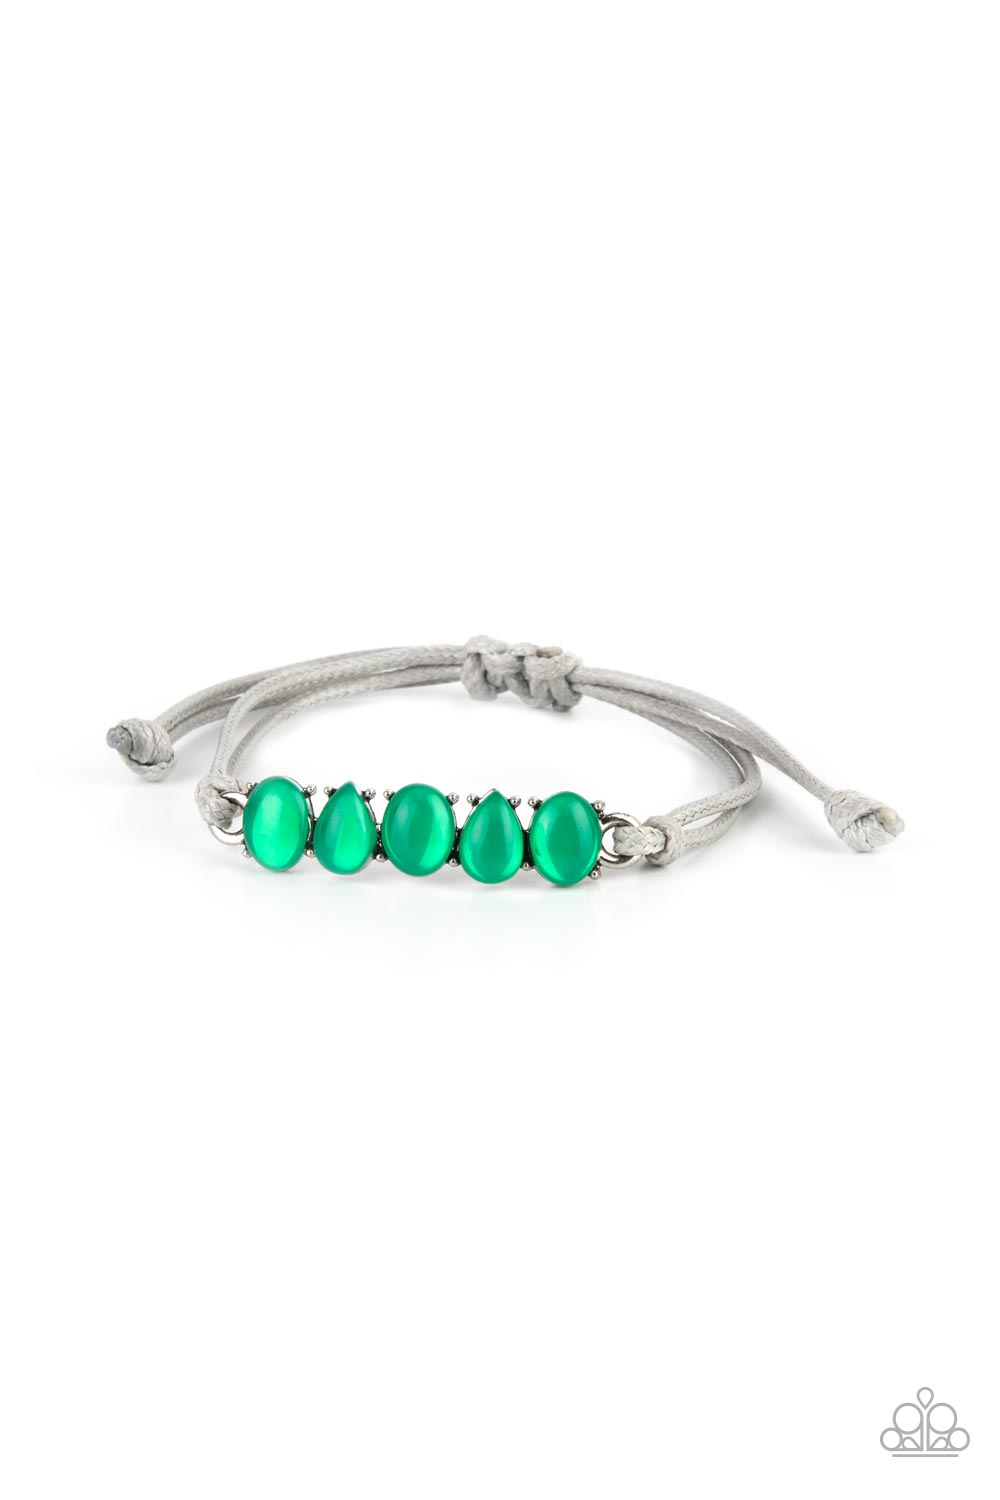 Opal Paradise Green Urban Bracelet - Paparazzi Accessories  Featuring silver pronged fittings, a row of oval and teardrop opal Mint beads delicately connects into a solitaire frame. The ethereal centerpiece is knotted in place with rows of shiny gray cording, creating a whimsically urban display around the wrist. Features an adjustable sliding knot closure.  Sold as one individual bracelet.